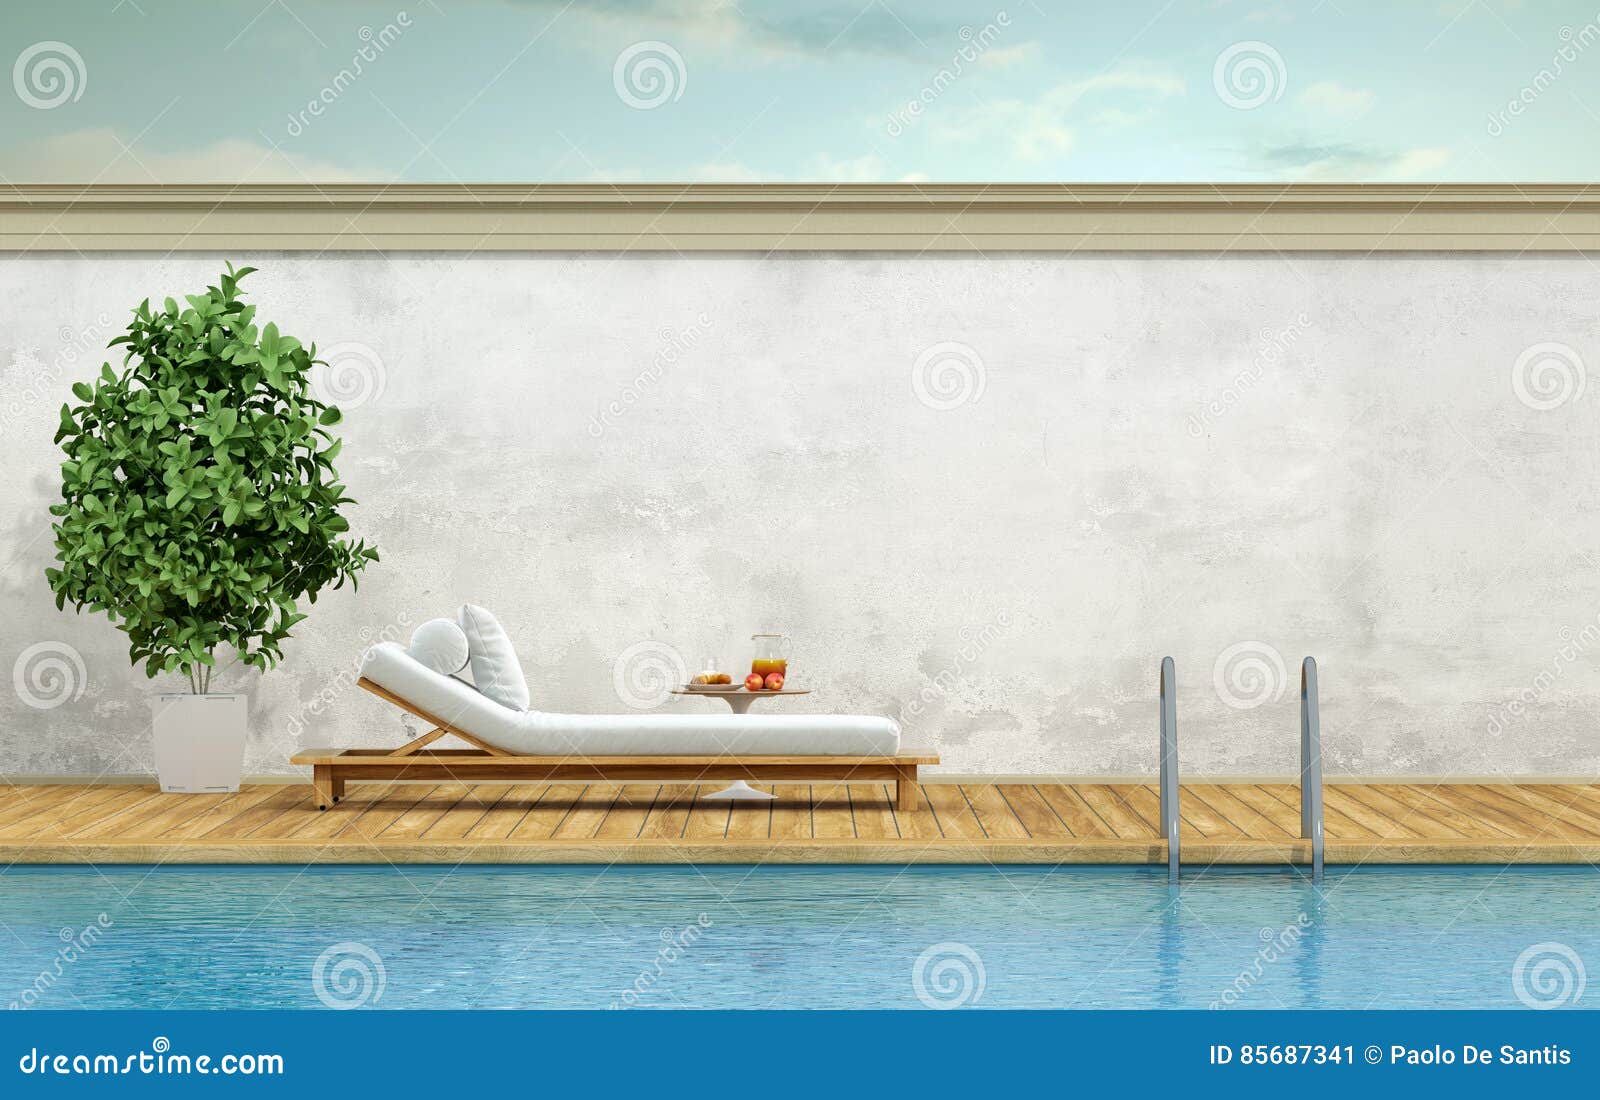 swimming pool with chaise lounge